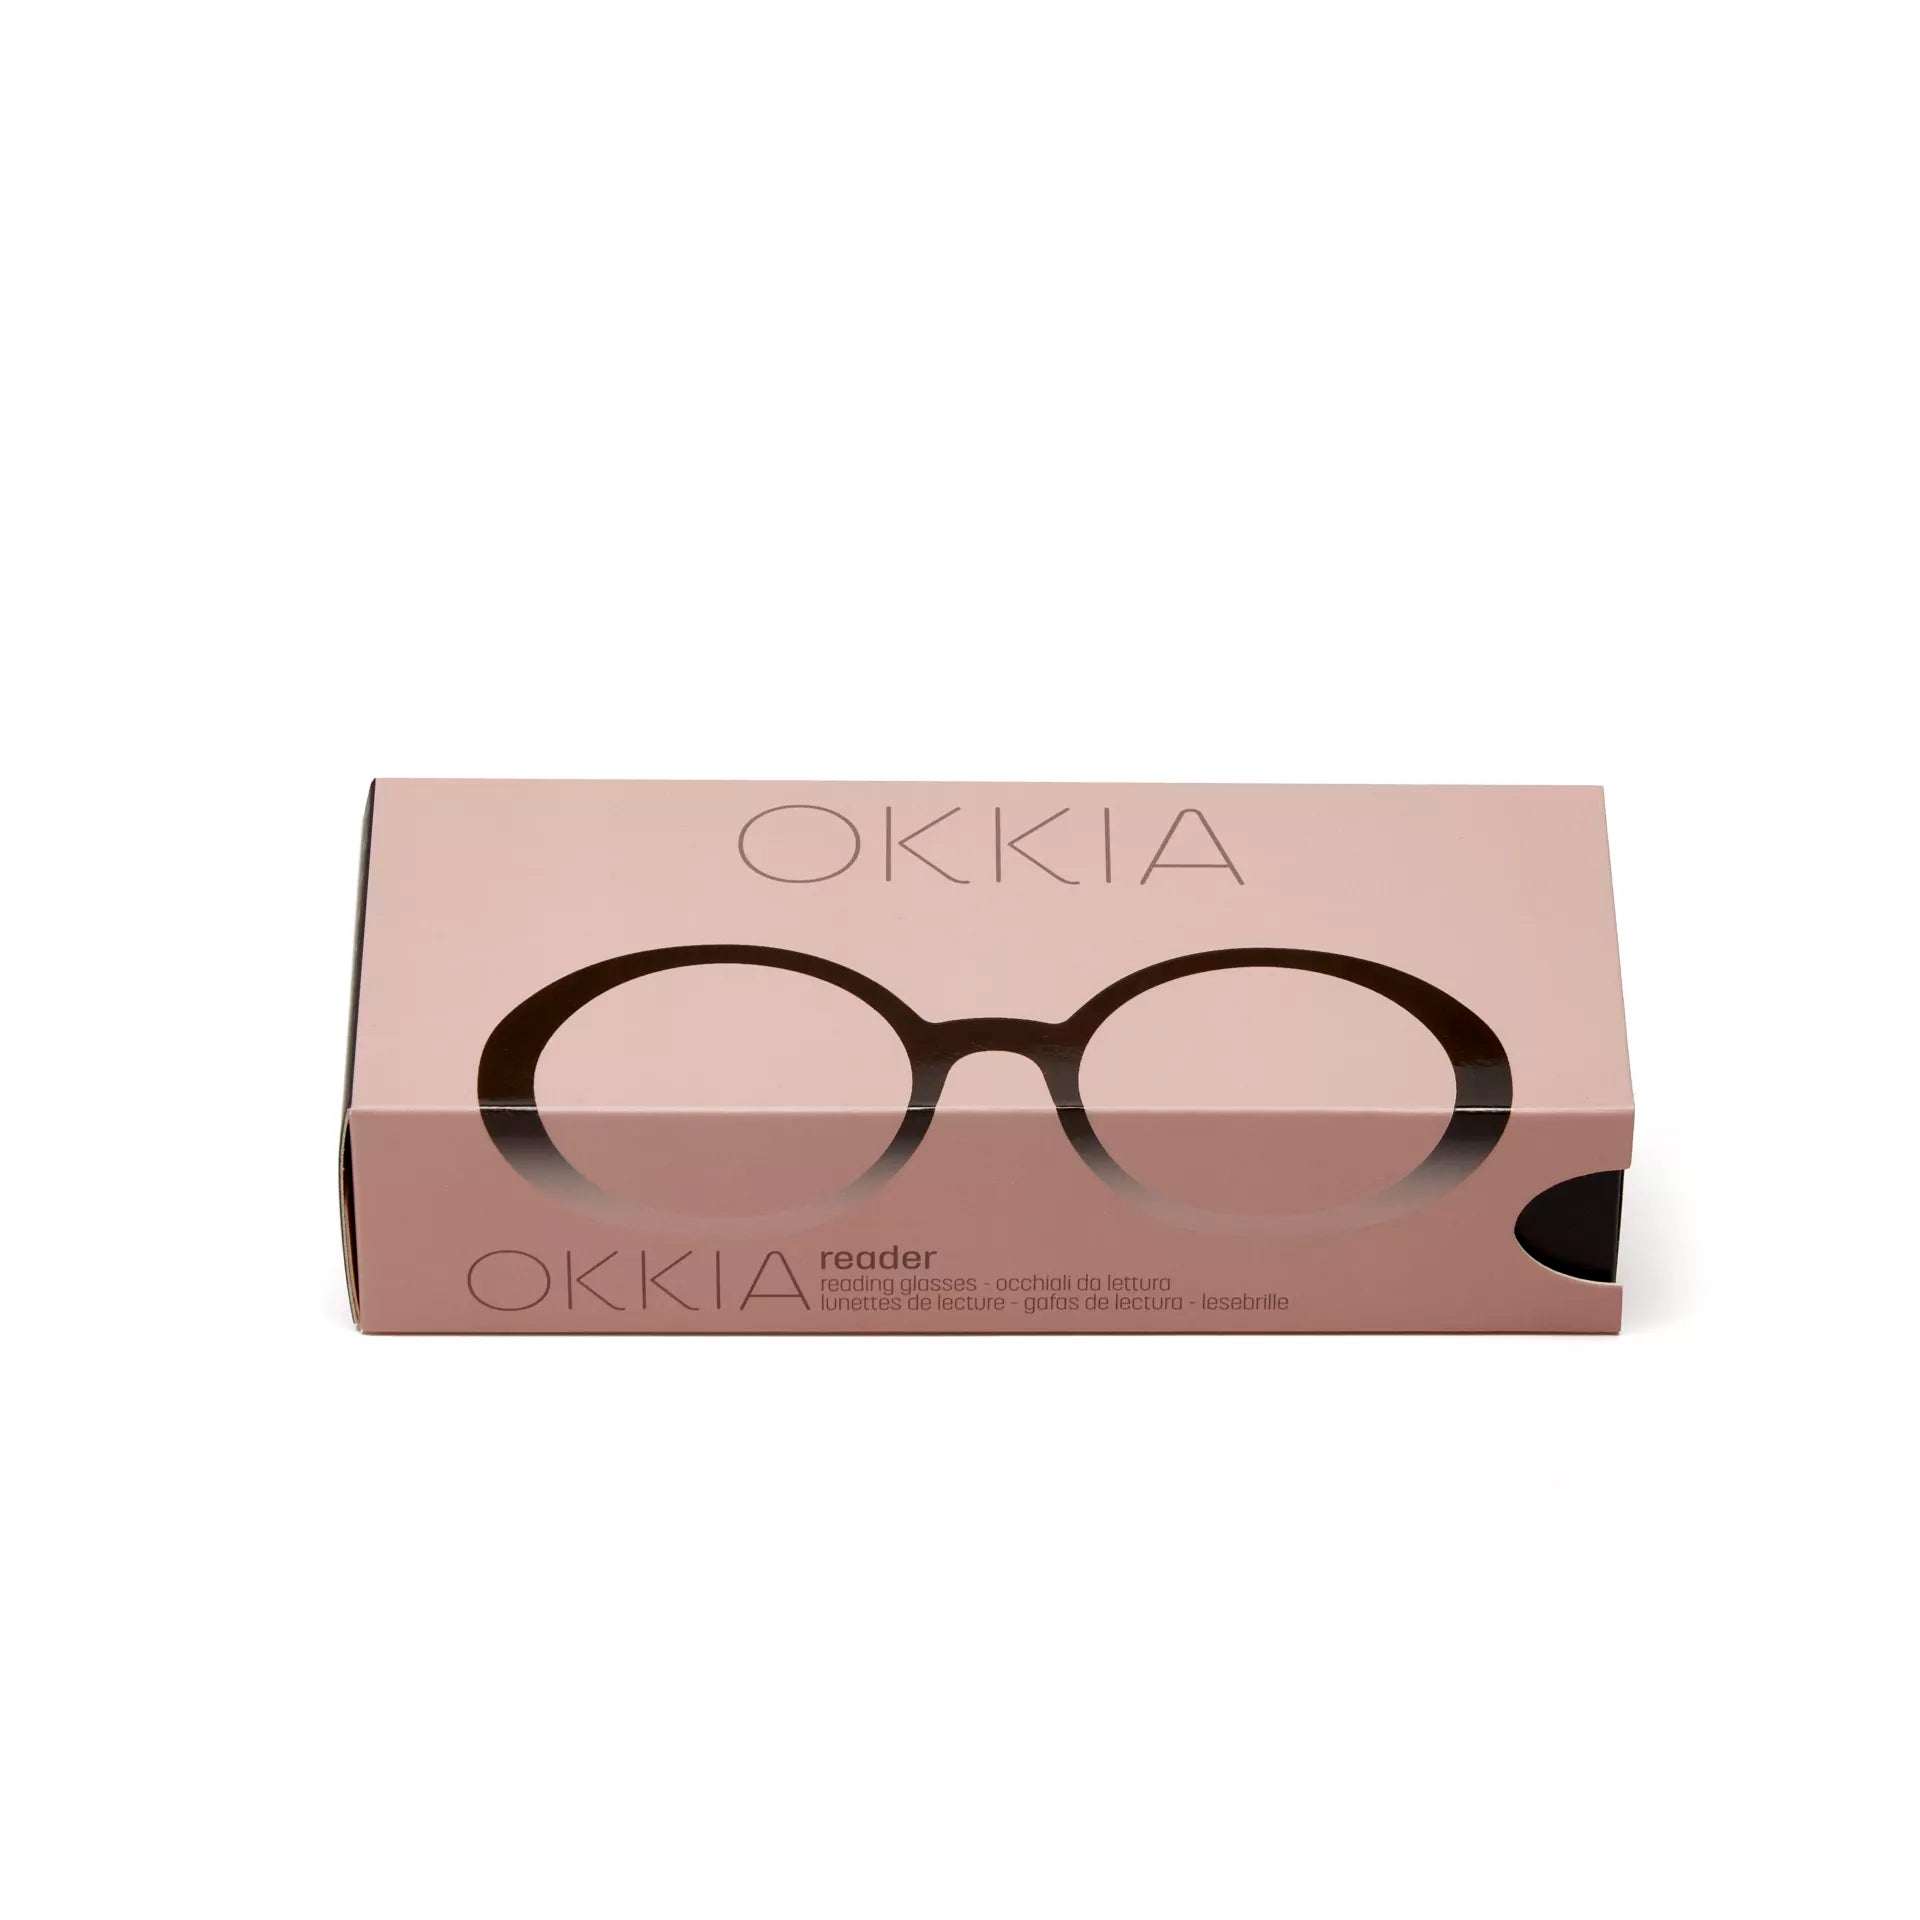 Fabulous Gifts Okkia Reading Glasses Tondo Black Rose 2.00 by Weirs of Baggot Street